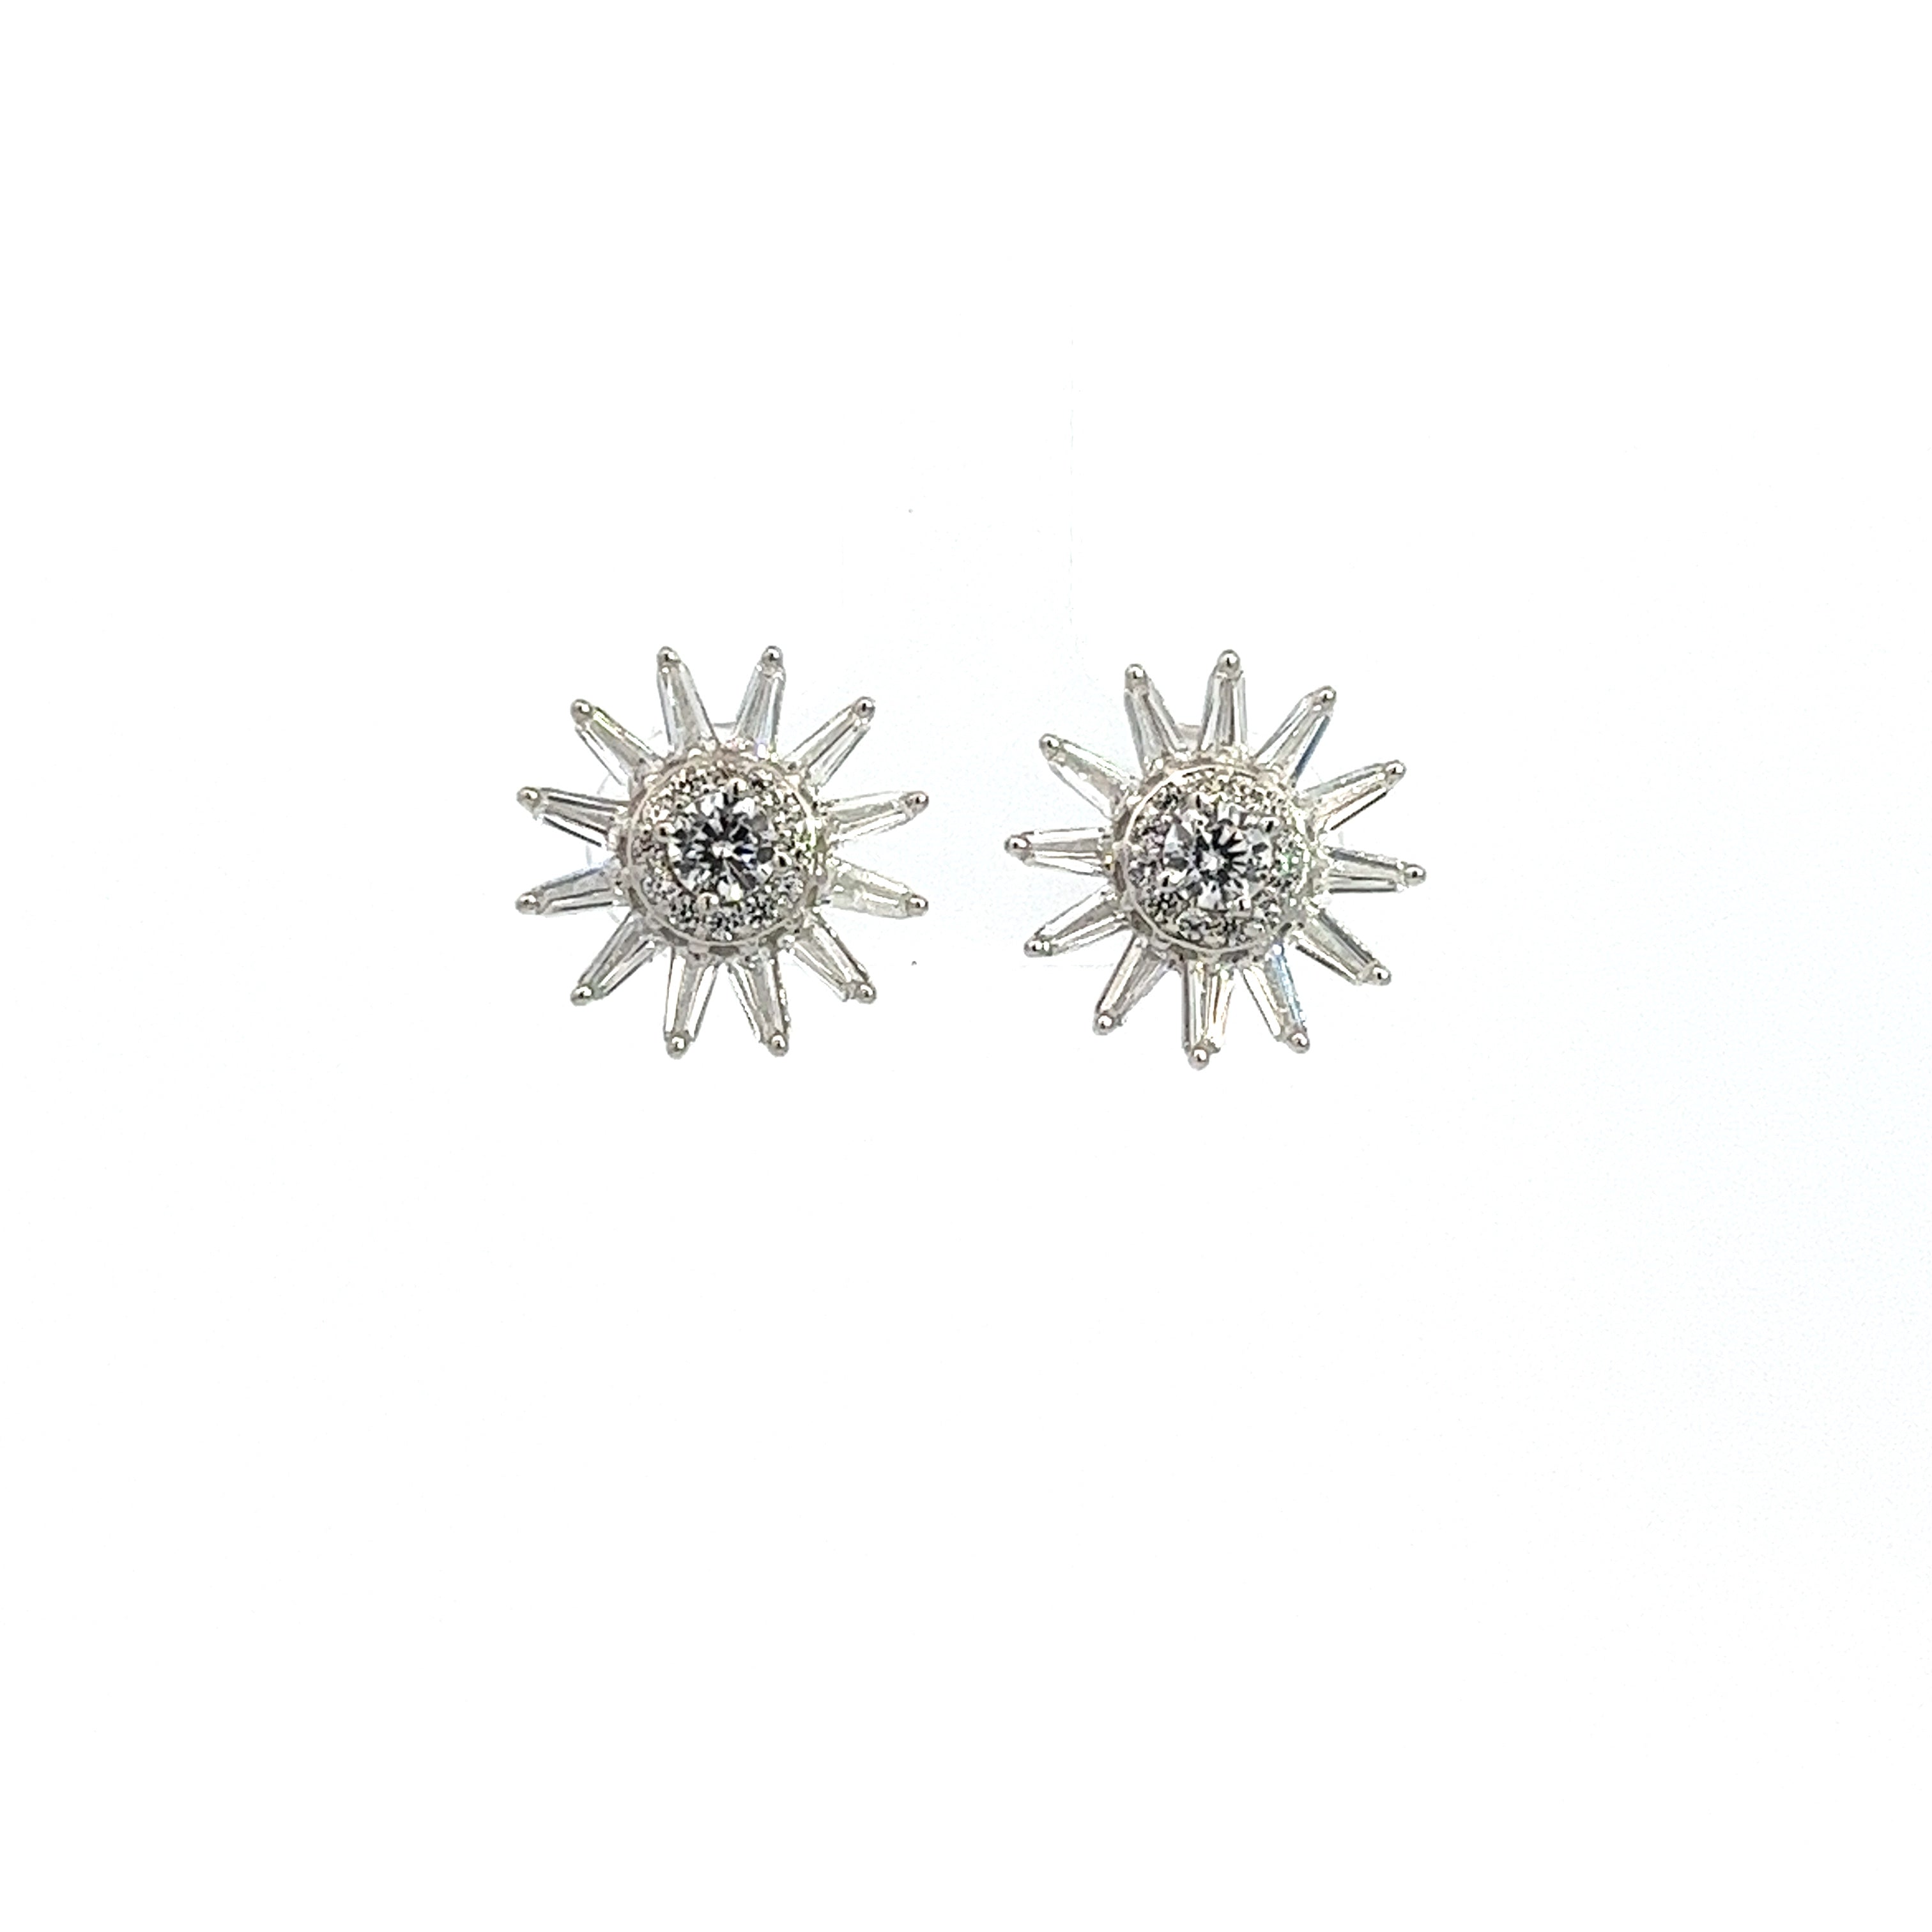 925 SILVER FLOWER EARRINGS WITH CRYSTALS